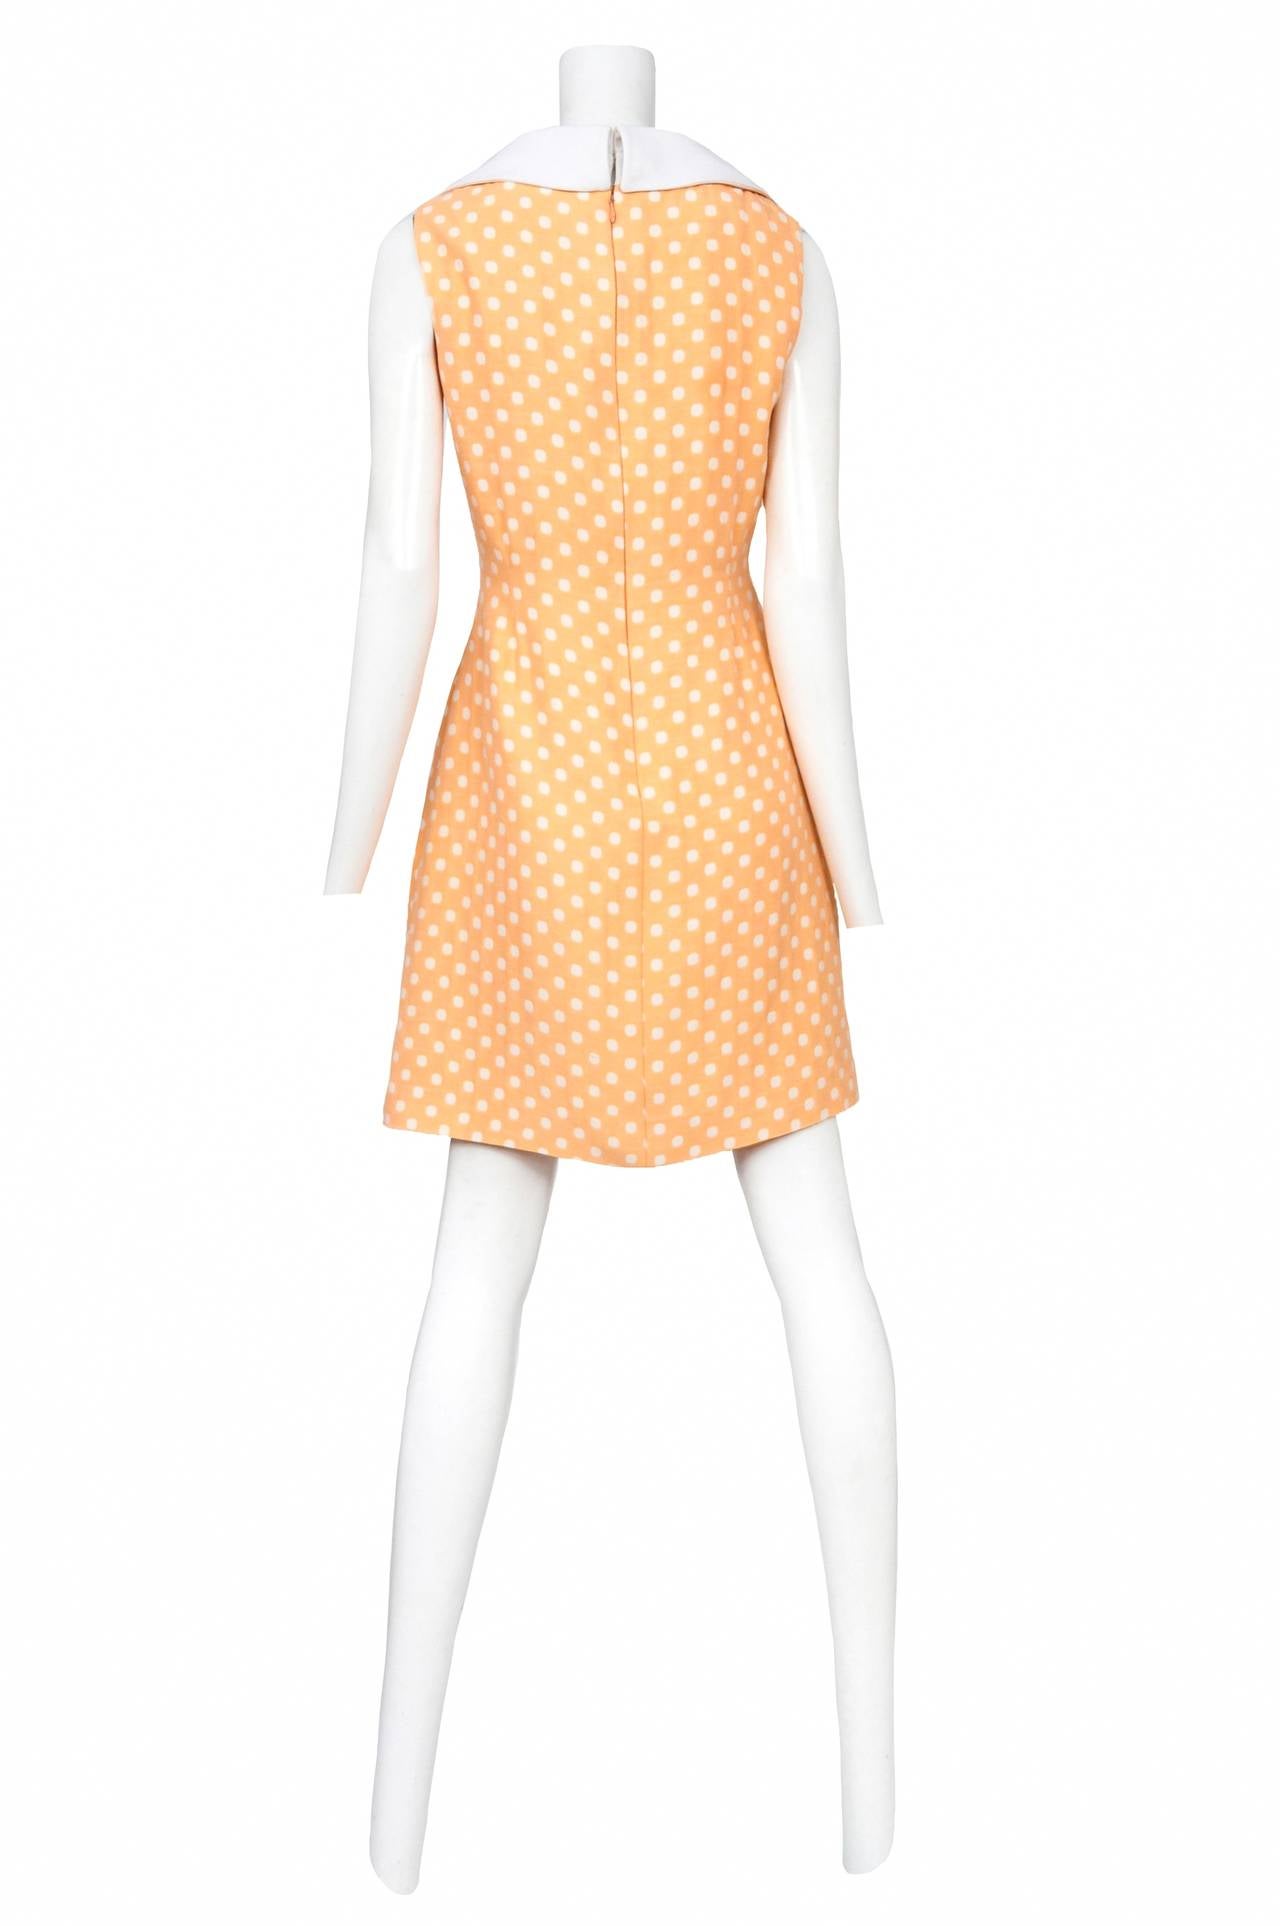 Vintage Pierre Cardin peach and white polka dot wool sleeveless dress featuring white trim at collar and side pockets with a center back zip.